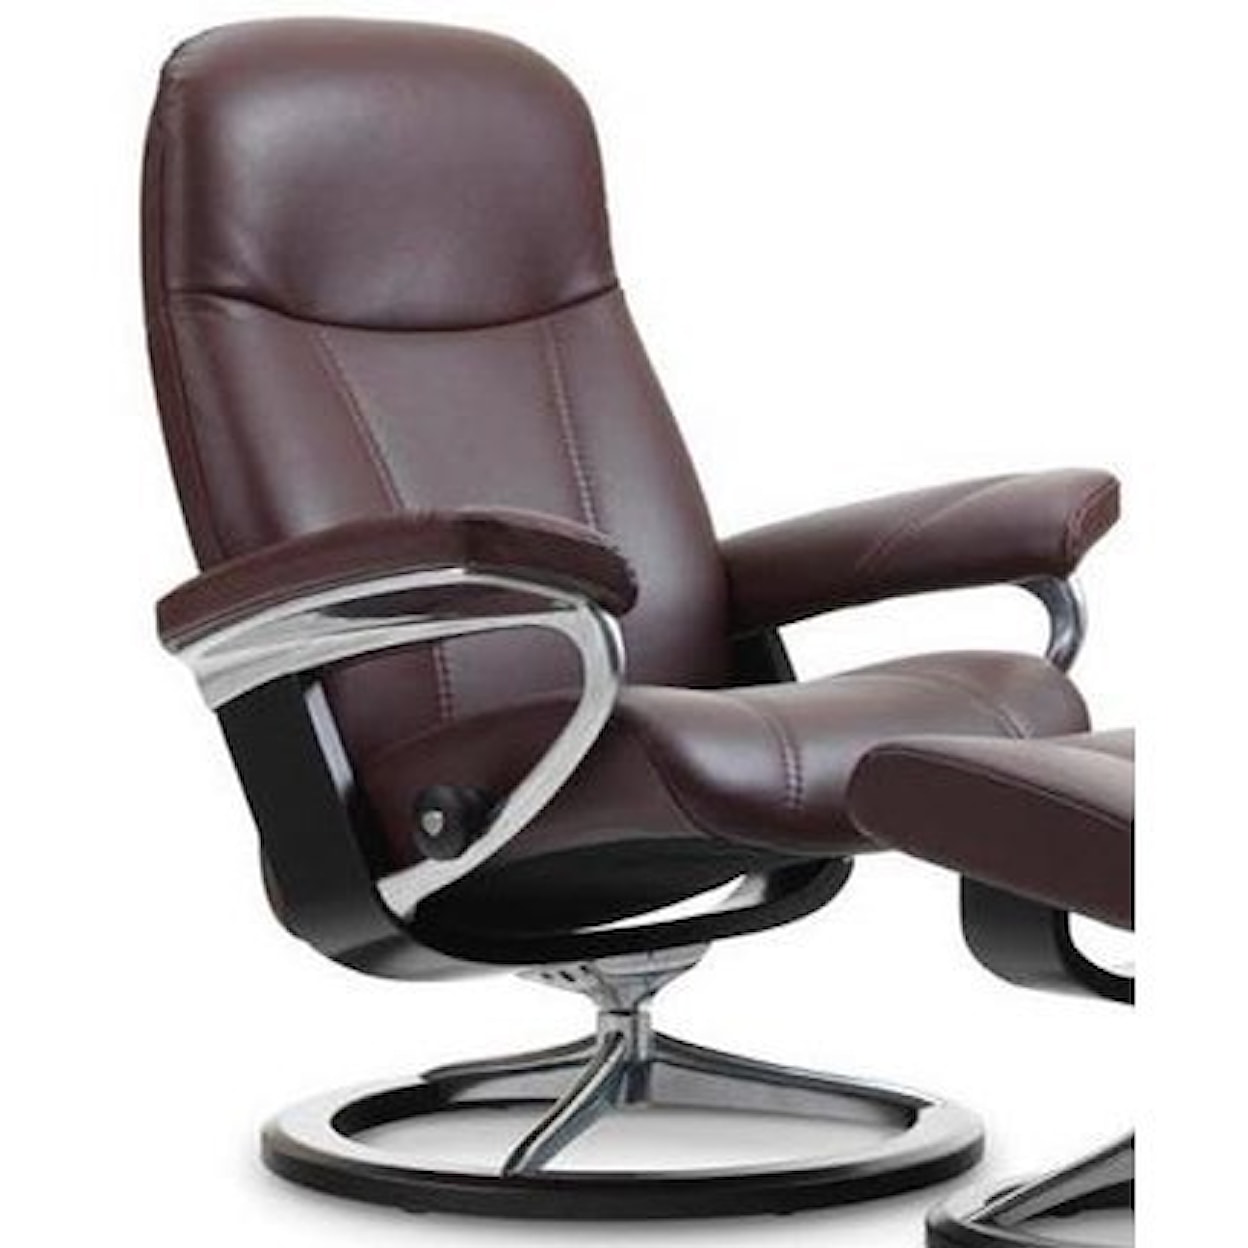 Stressless by Ekornes Consul Small Reclining Chair with Signature Base